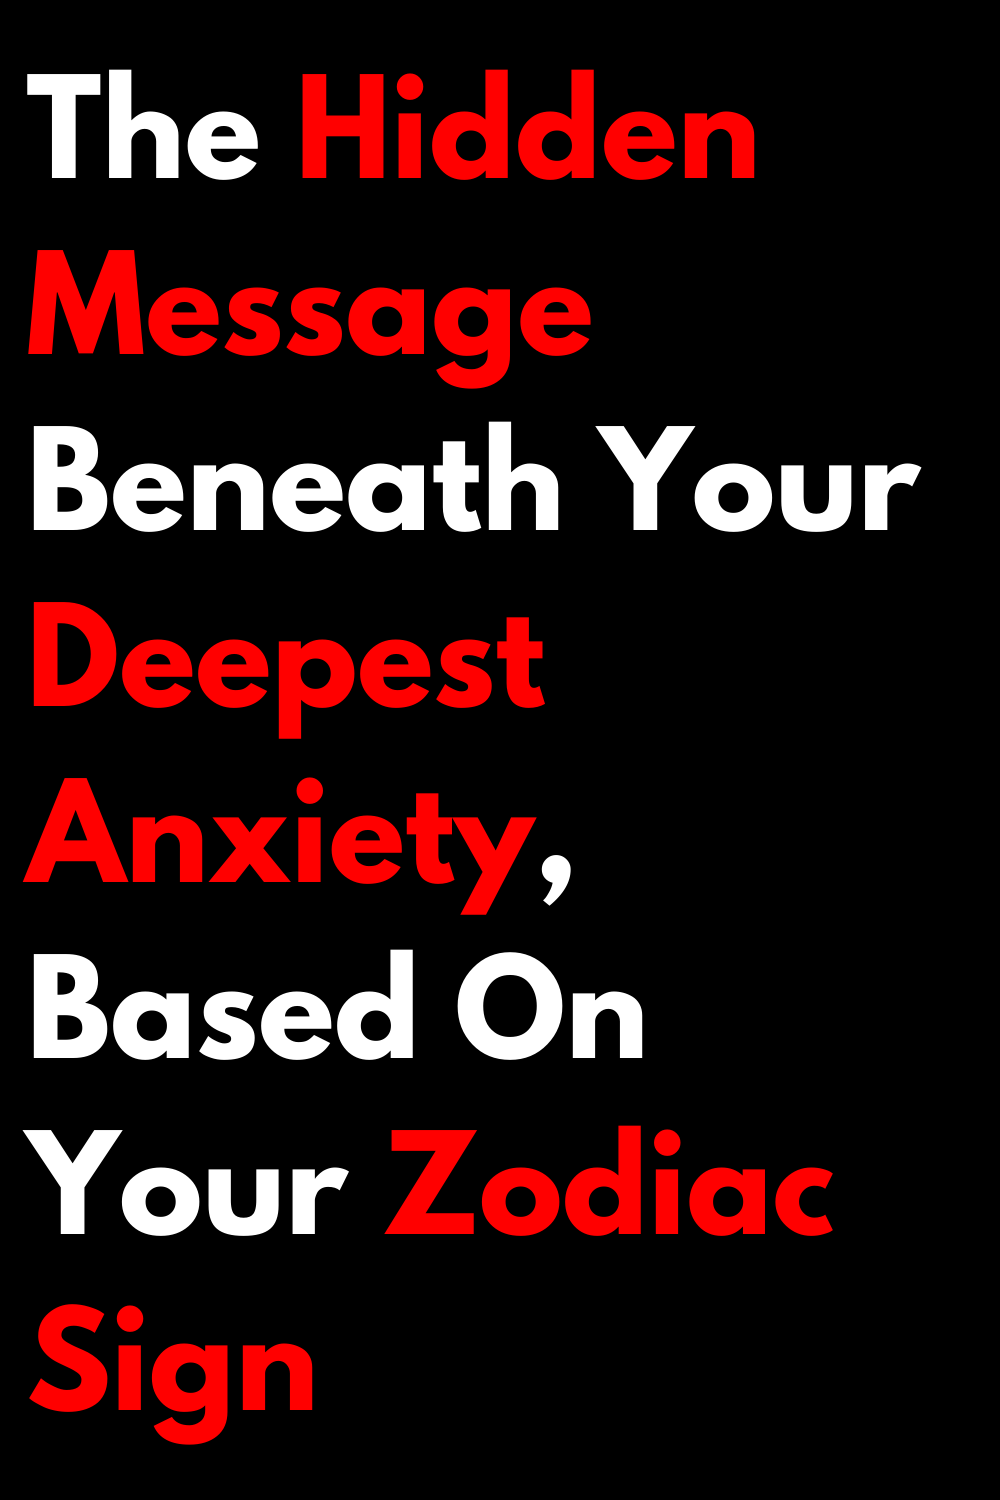 The Hidden Message Beneath Your Deepest Anxiety, Based On Your Zodiac Sign